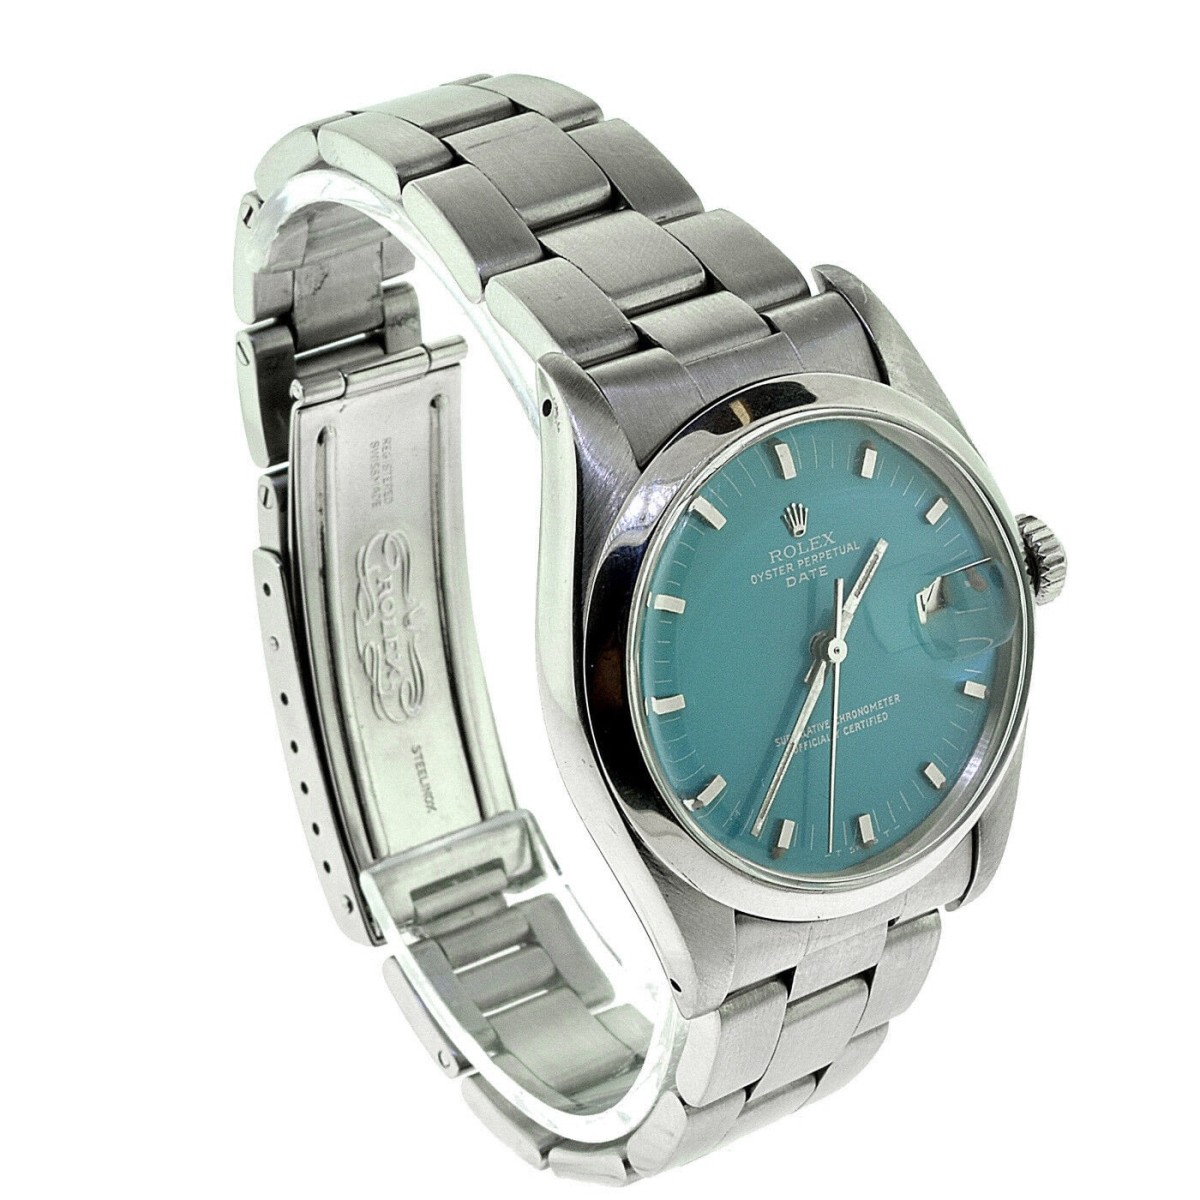 Rolex Date Ref. 1500 Turquoise Dial